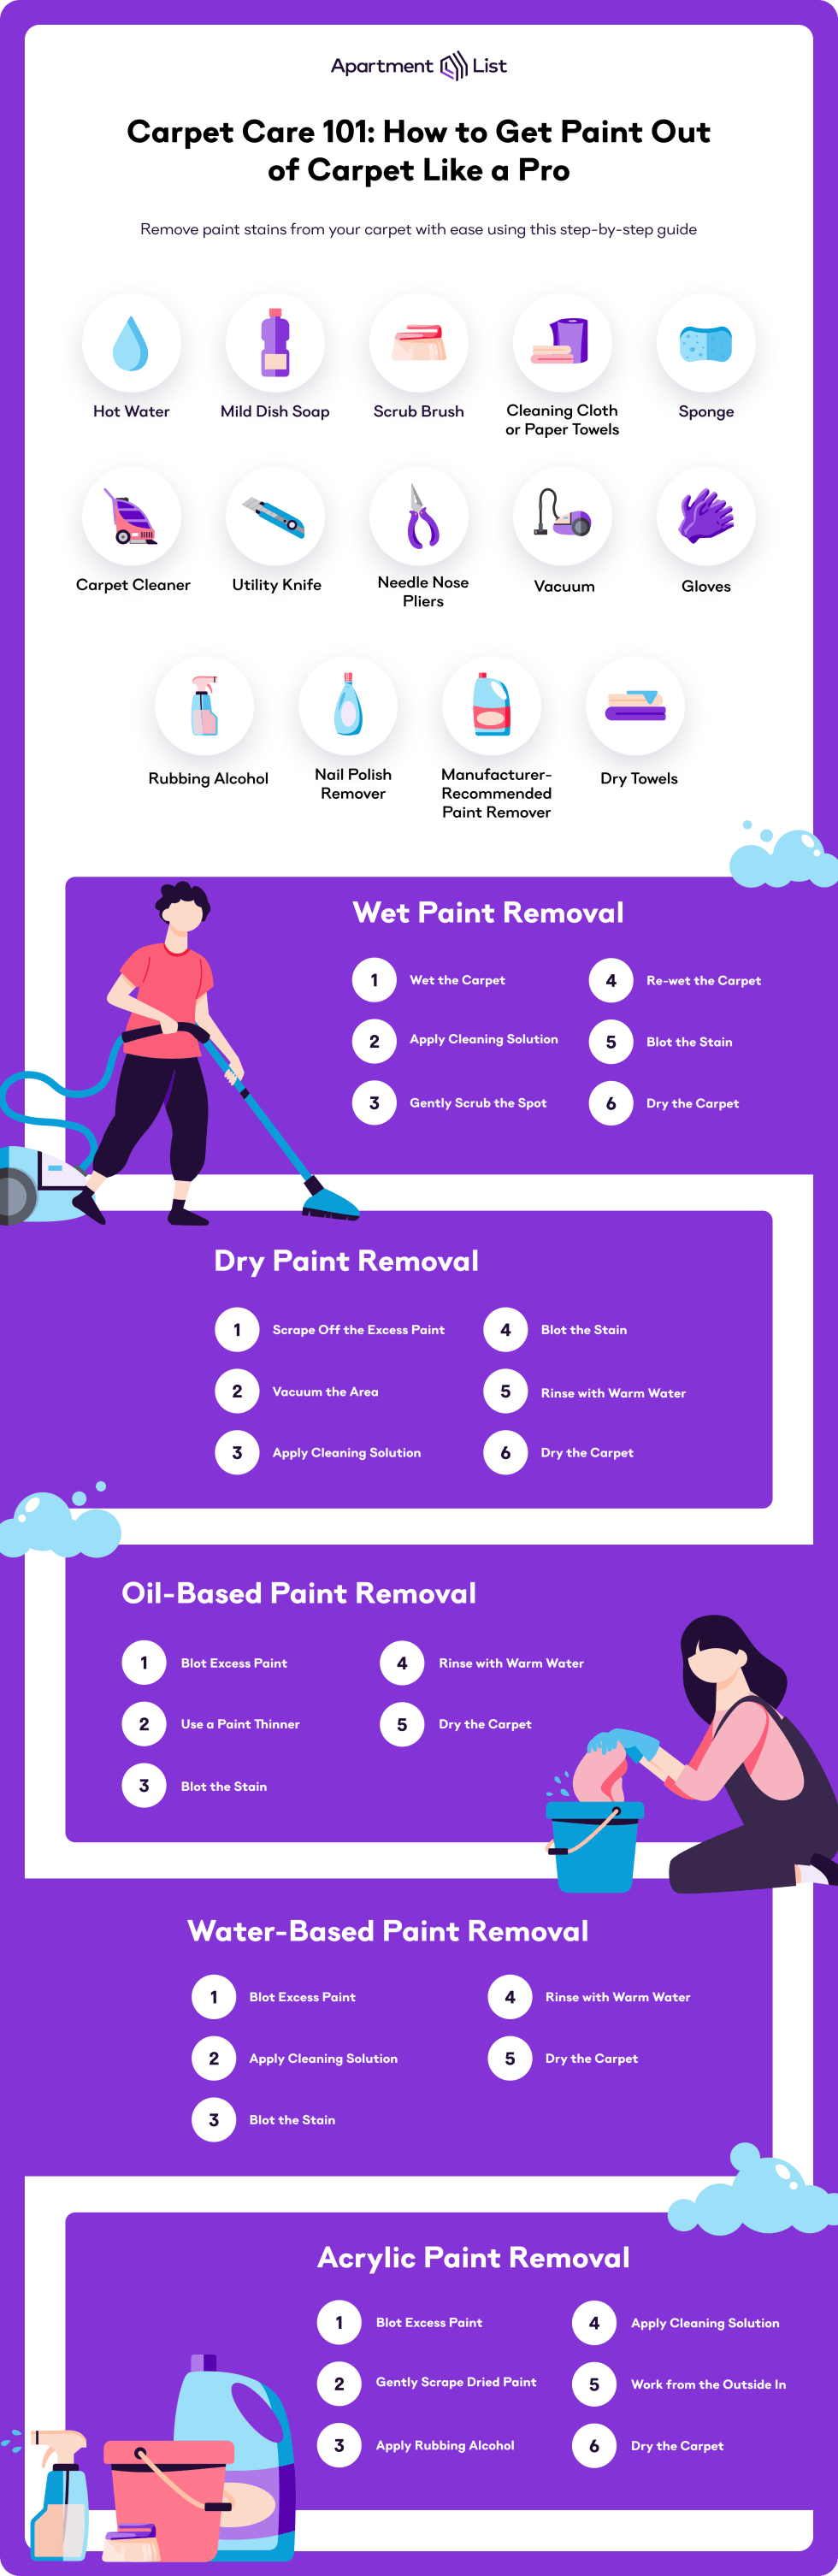 Infographic Carpet Care 101 How to Get Paint Out of Carpet Like a Pro